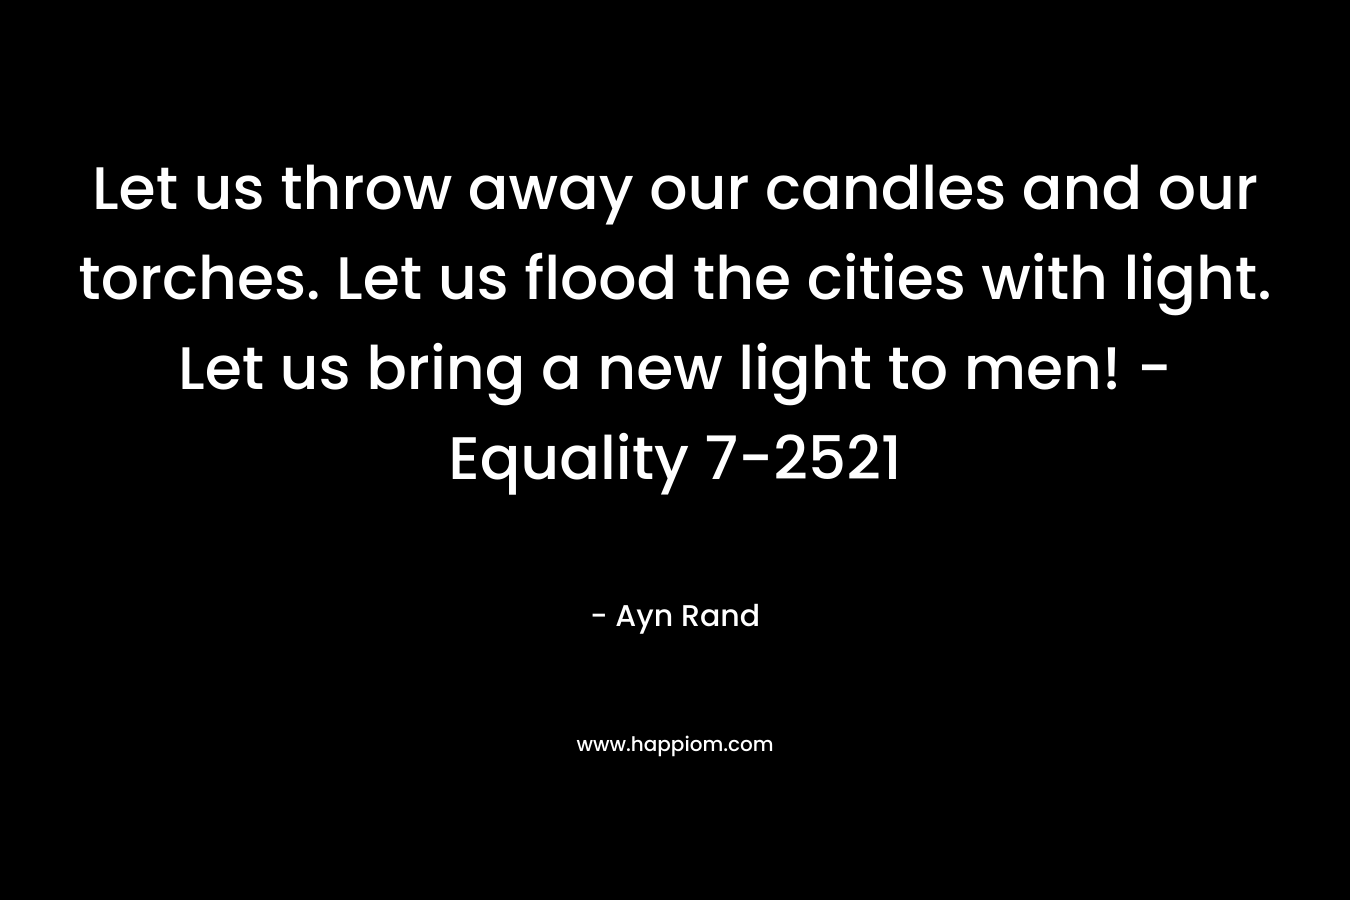 Let us throw away our candles and our torches. Let us flood the cities with light. Let us bring a new light to men! -Equality 7-2521